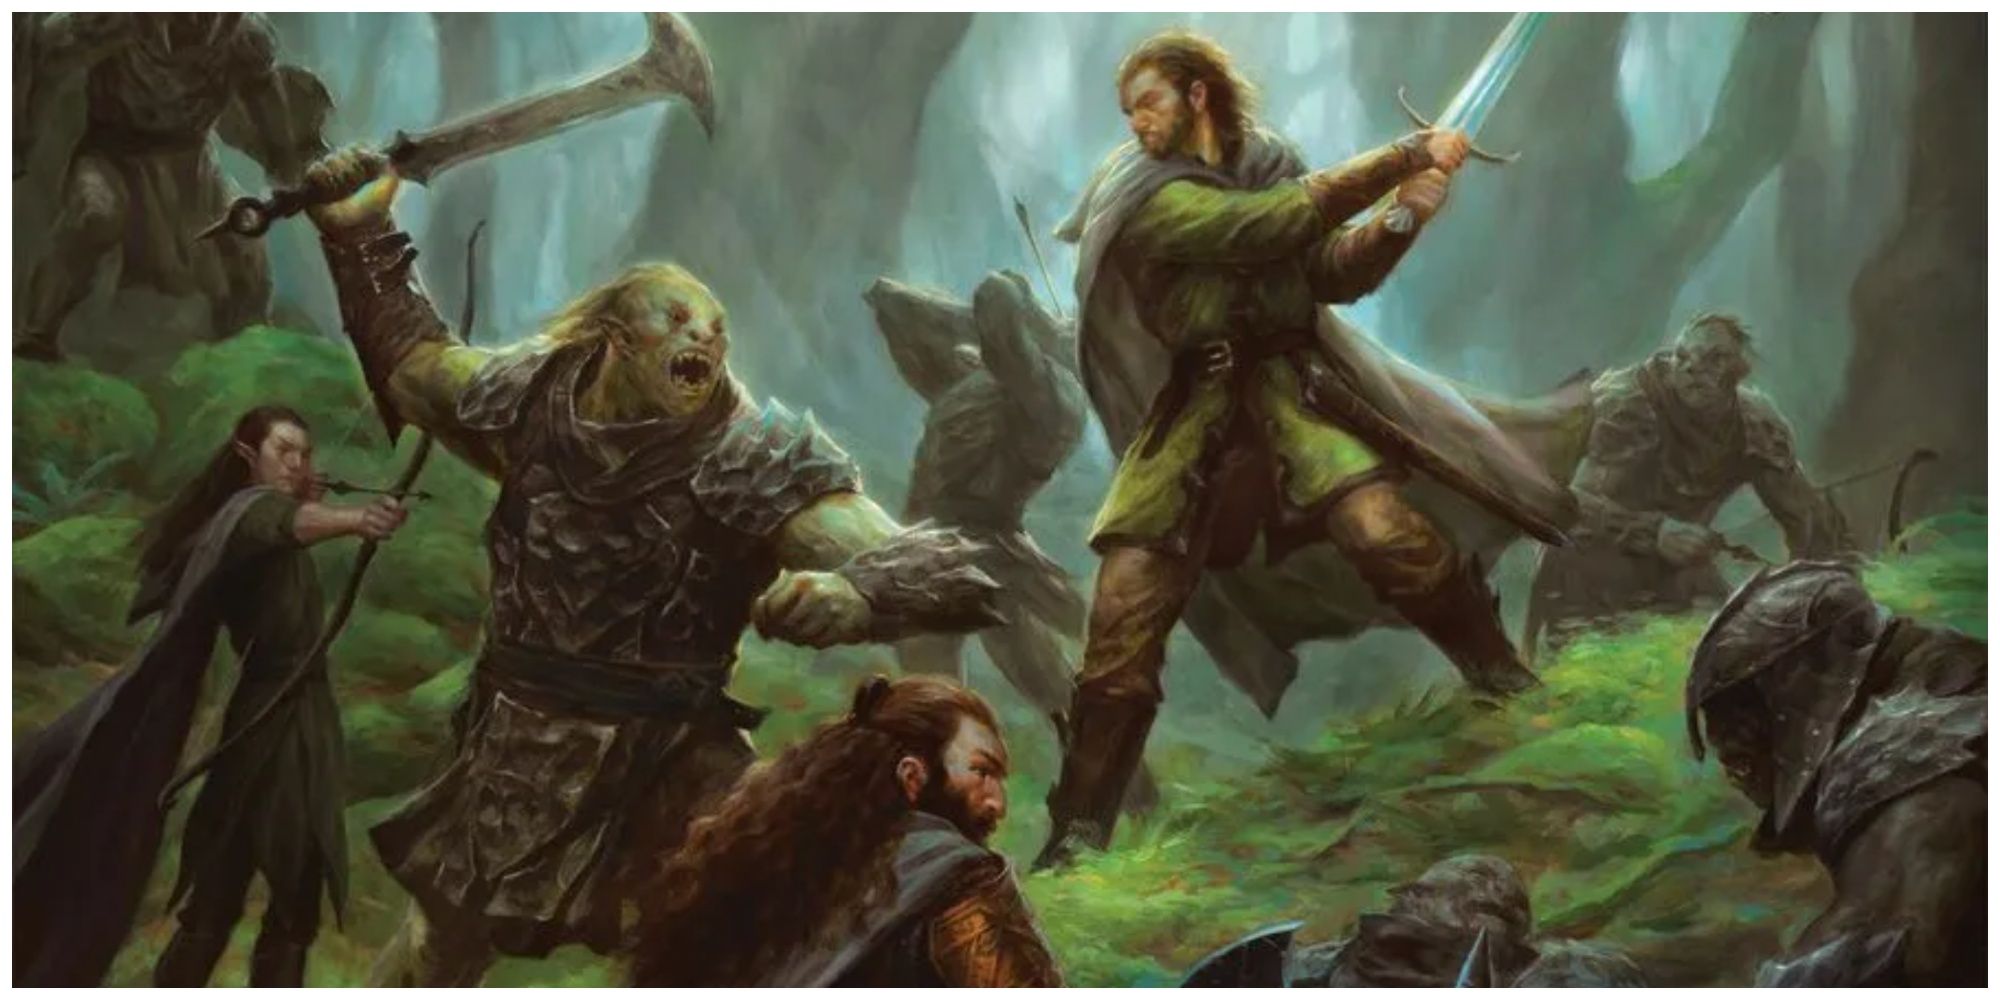 The Lord Of The Rings: Journeys In Middle Earth box art